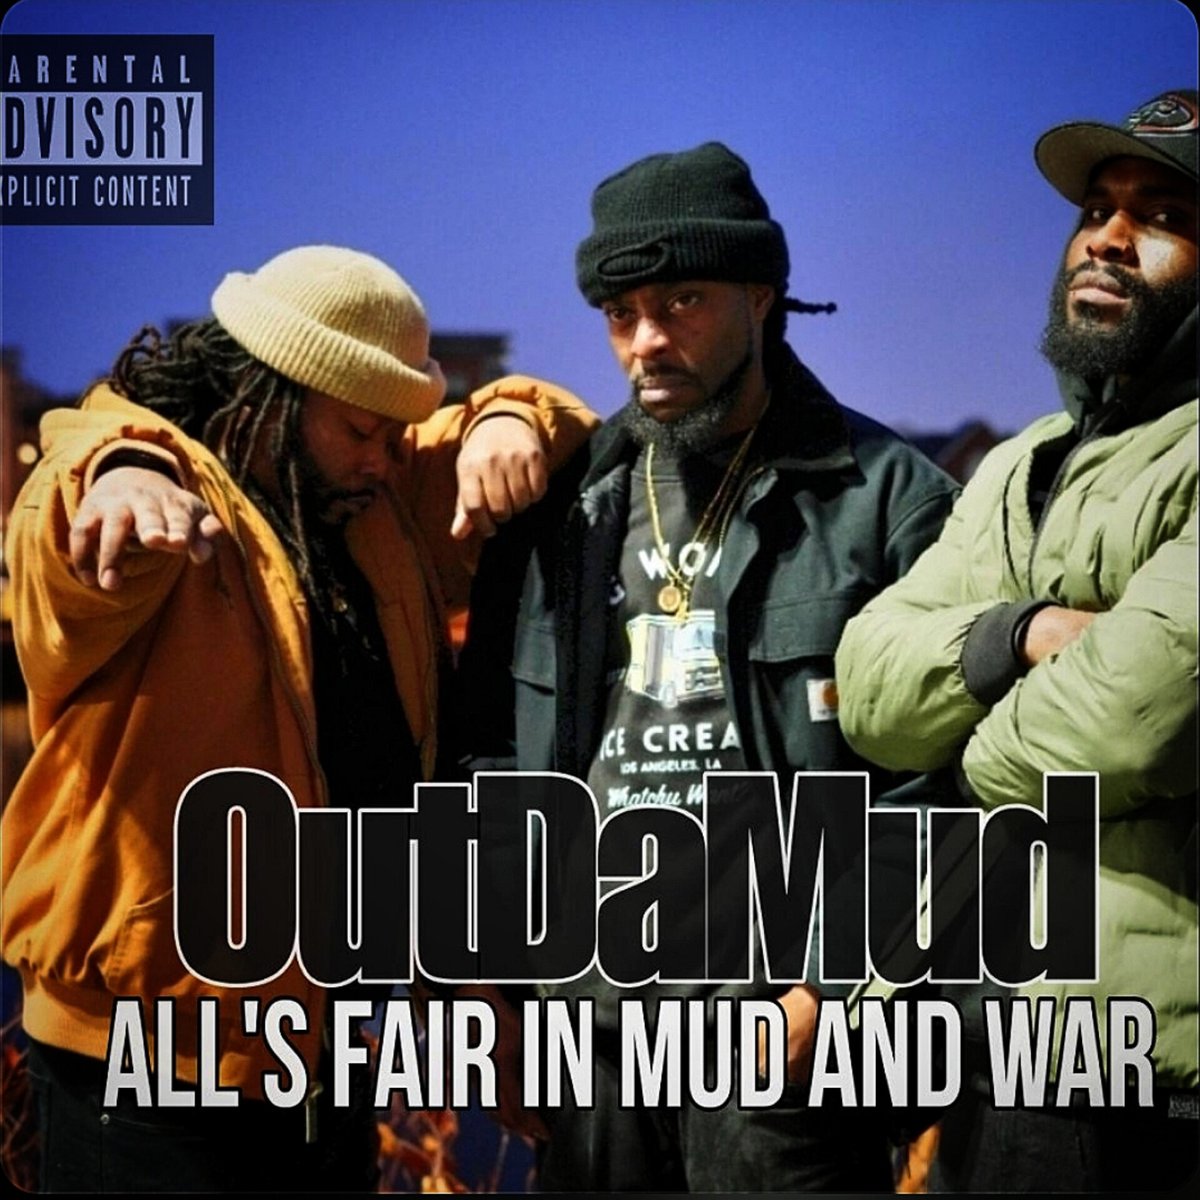 Check out my blog post featuring OutDaMud's new EP All's Fair In Mud And War Out now on all streaming platforms. #NJFleetdjs #Heritagehiphop #newmusic